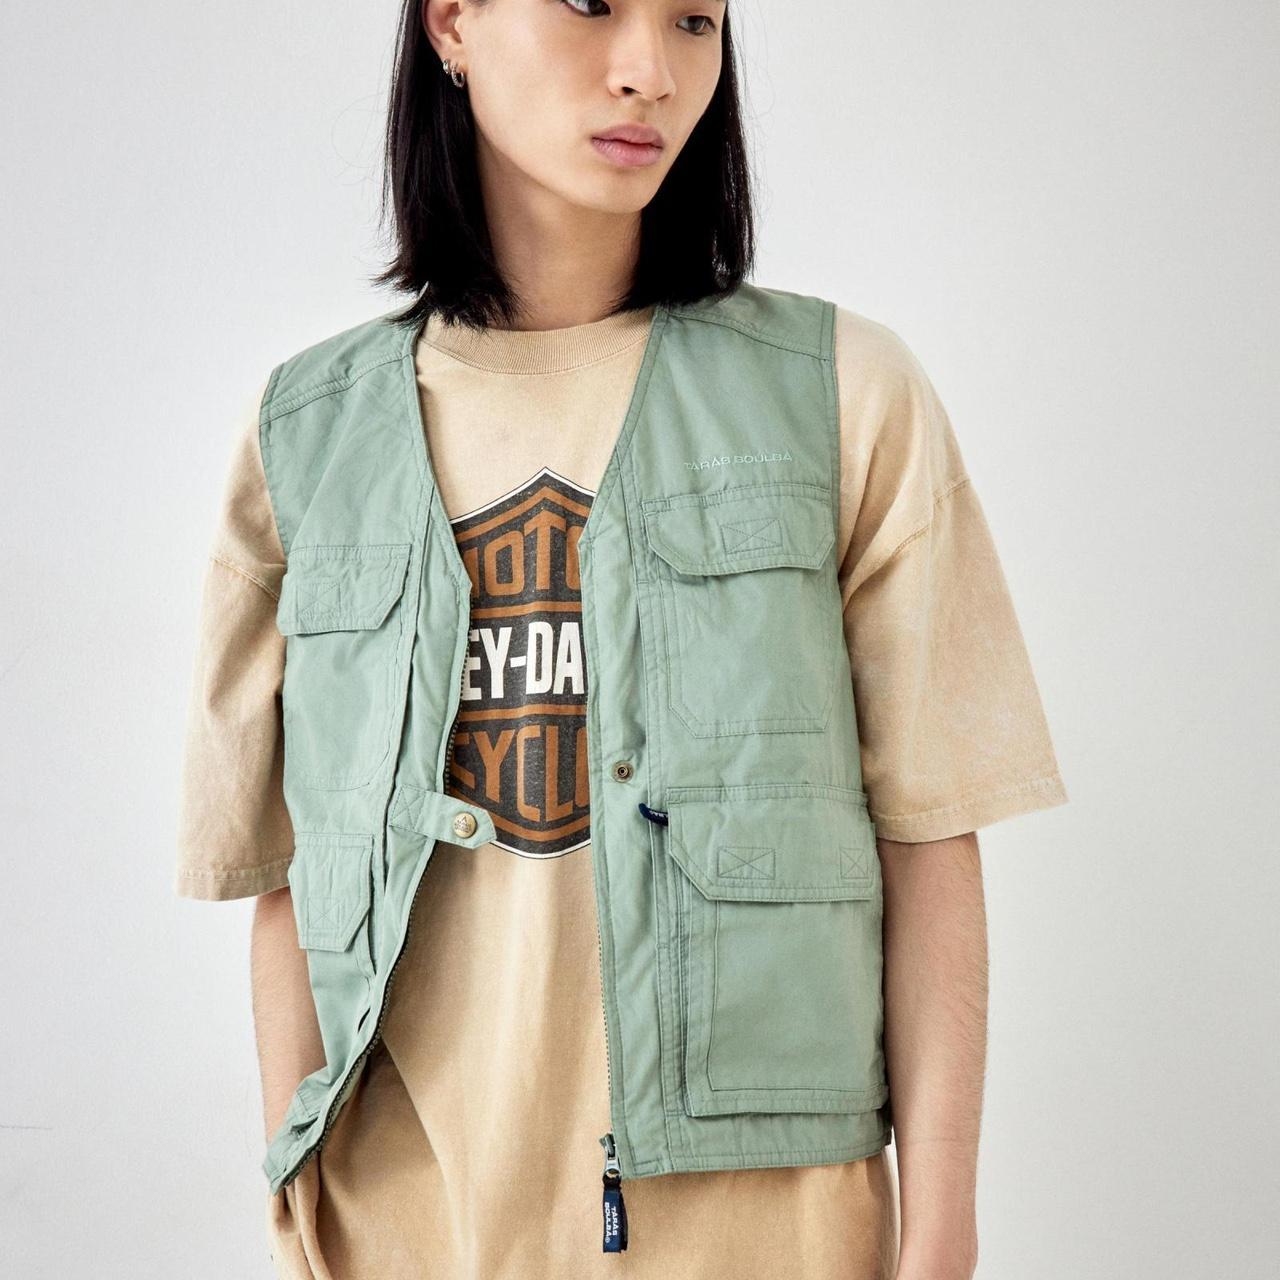 Urban Outfitters Women's Green Gilet